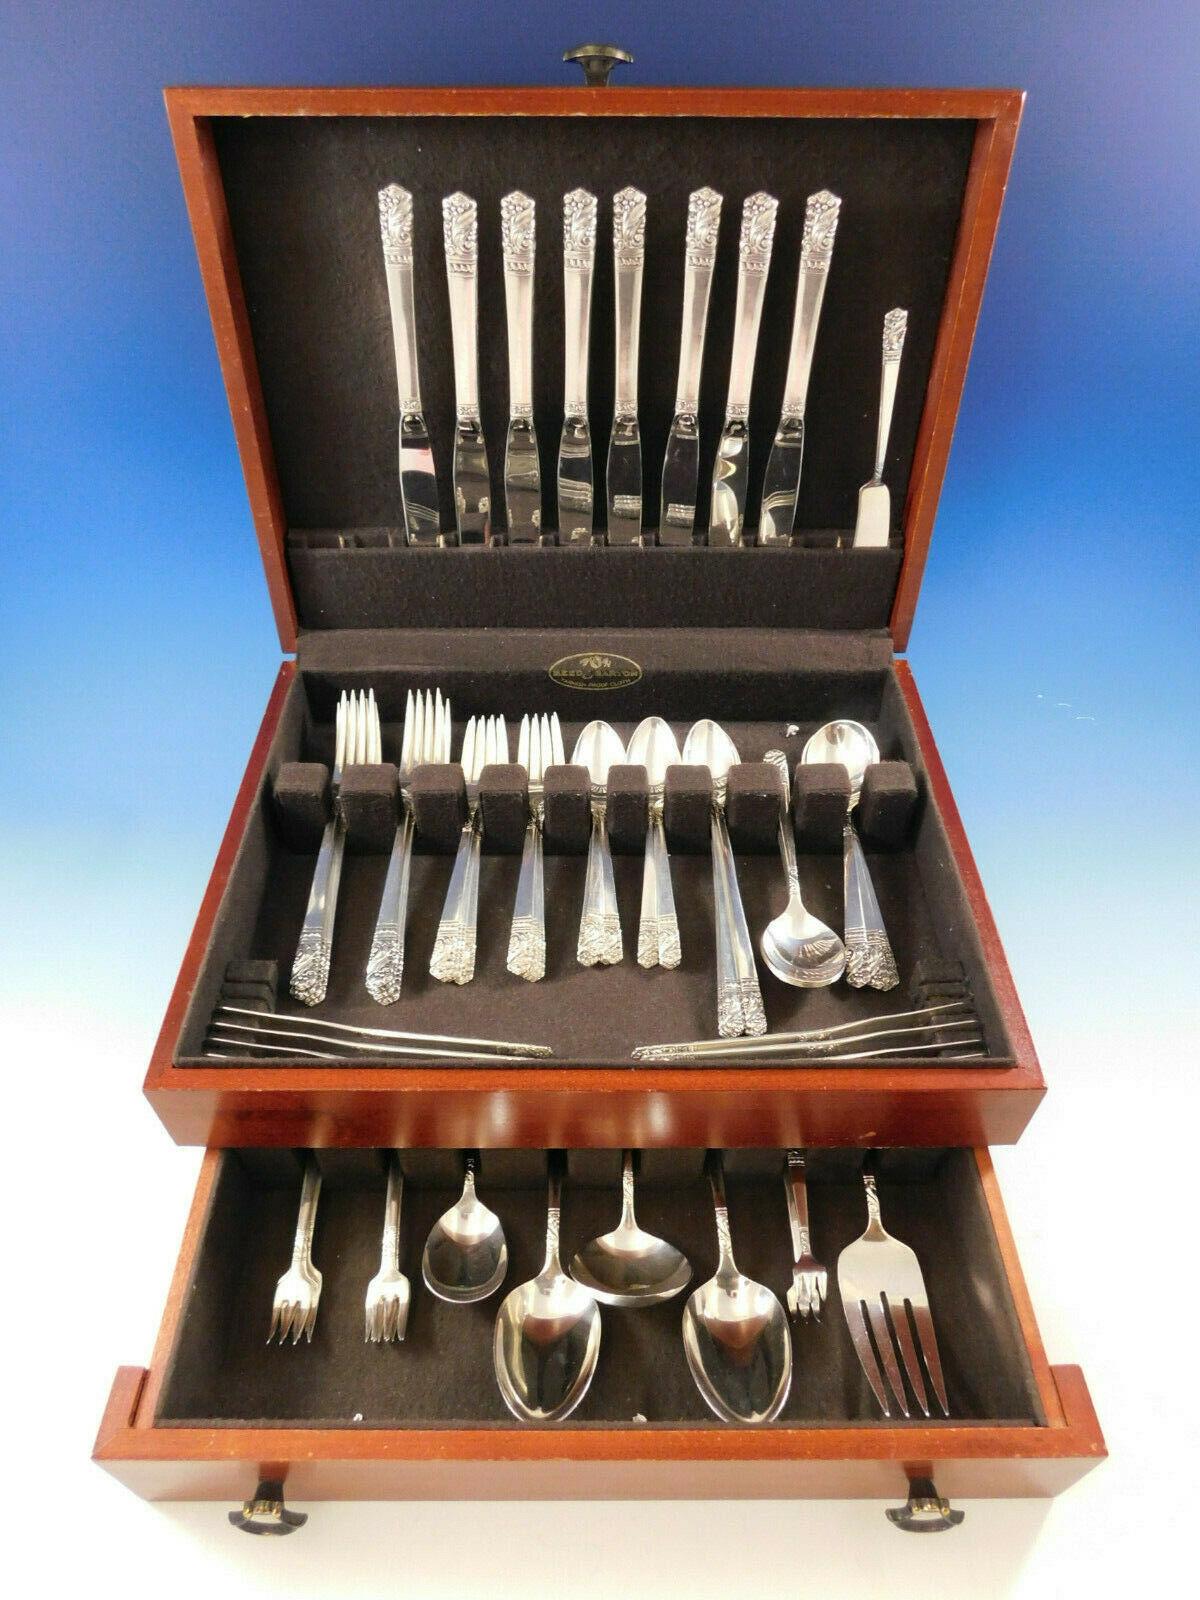 Exquisite Mansion House by Heirloom-Oneida sterling silver Flatware set - 71 pieces. This set includes:

 8 knives, 8 7/8